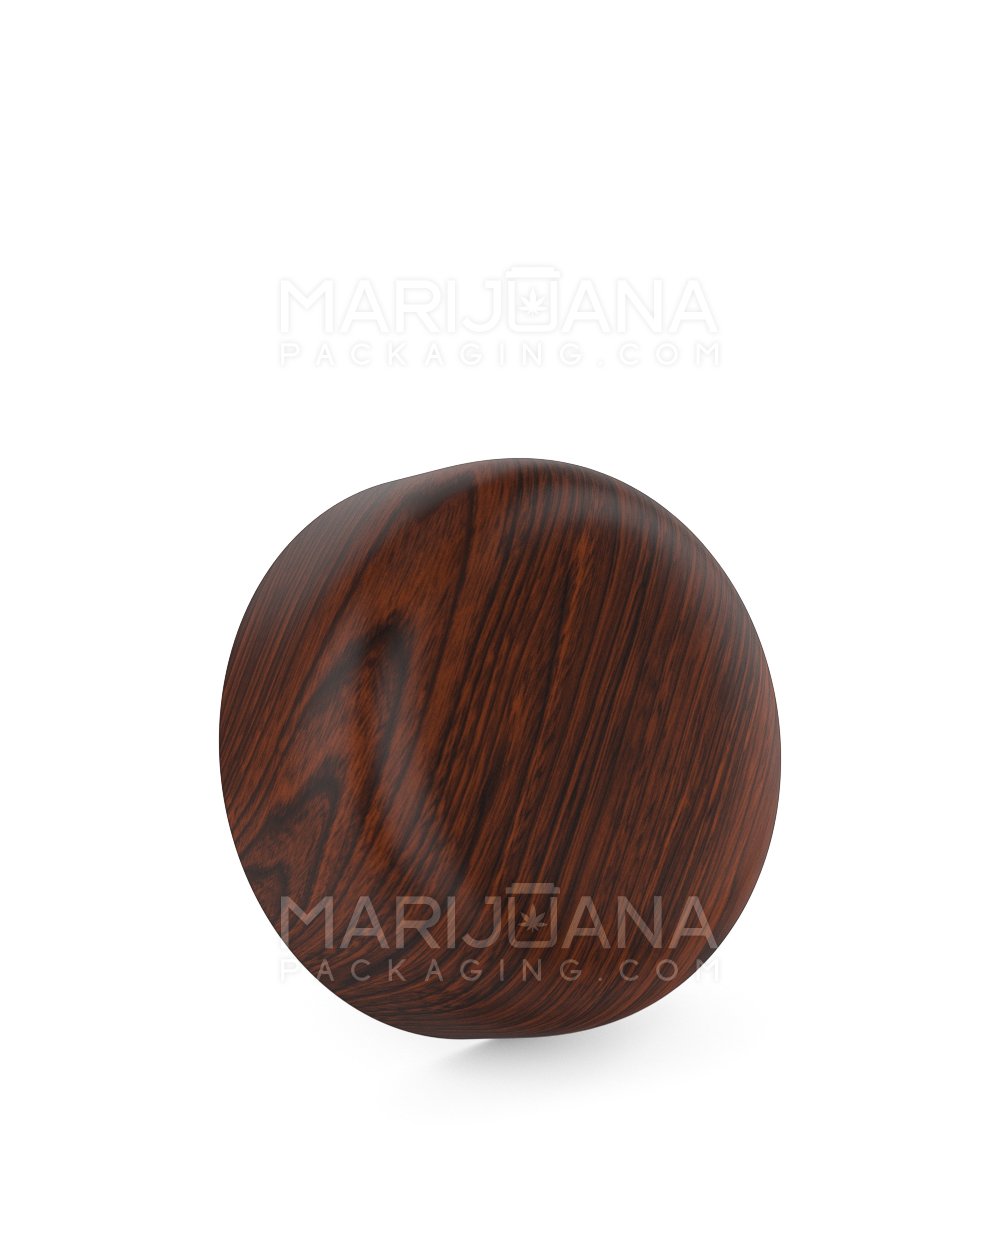 Child Resistant | Dome Push Down & Turn Plastic Caps w/ Foam Liner | 53mm - Redwood Wood - 120 Count - 1